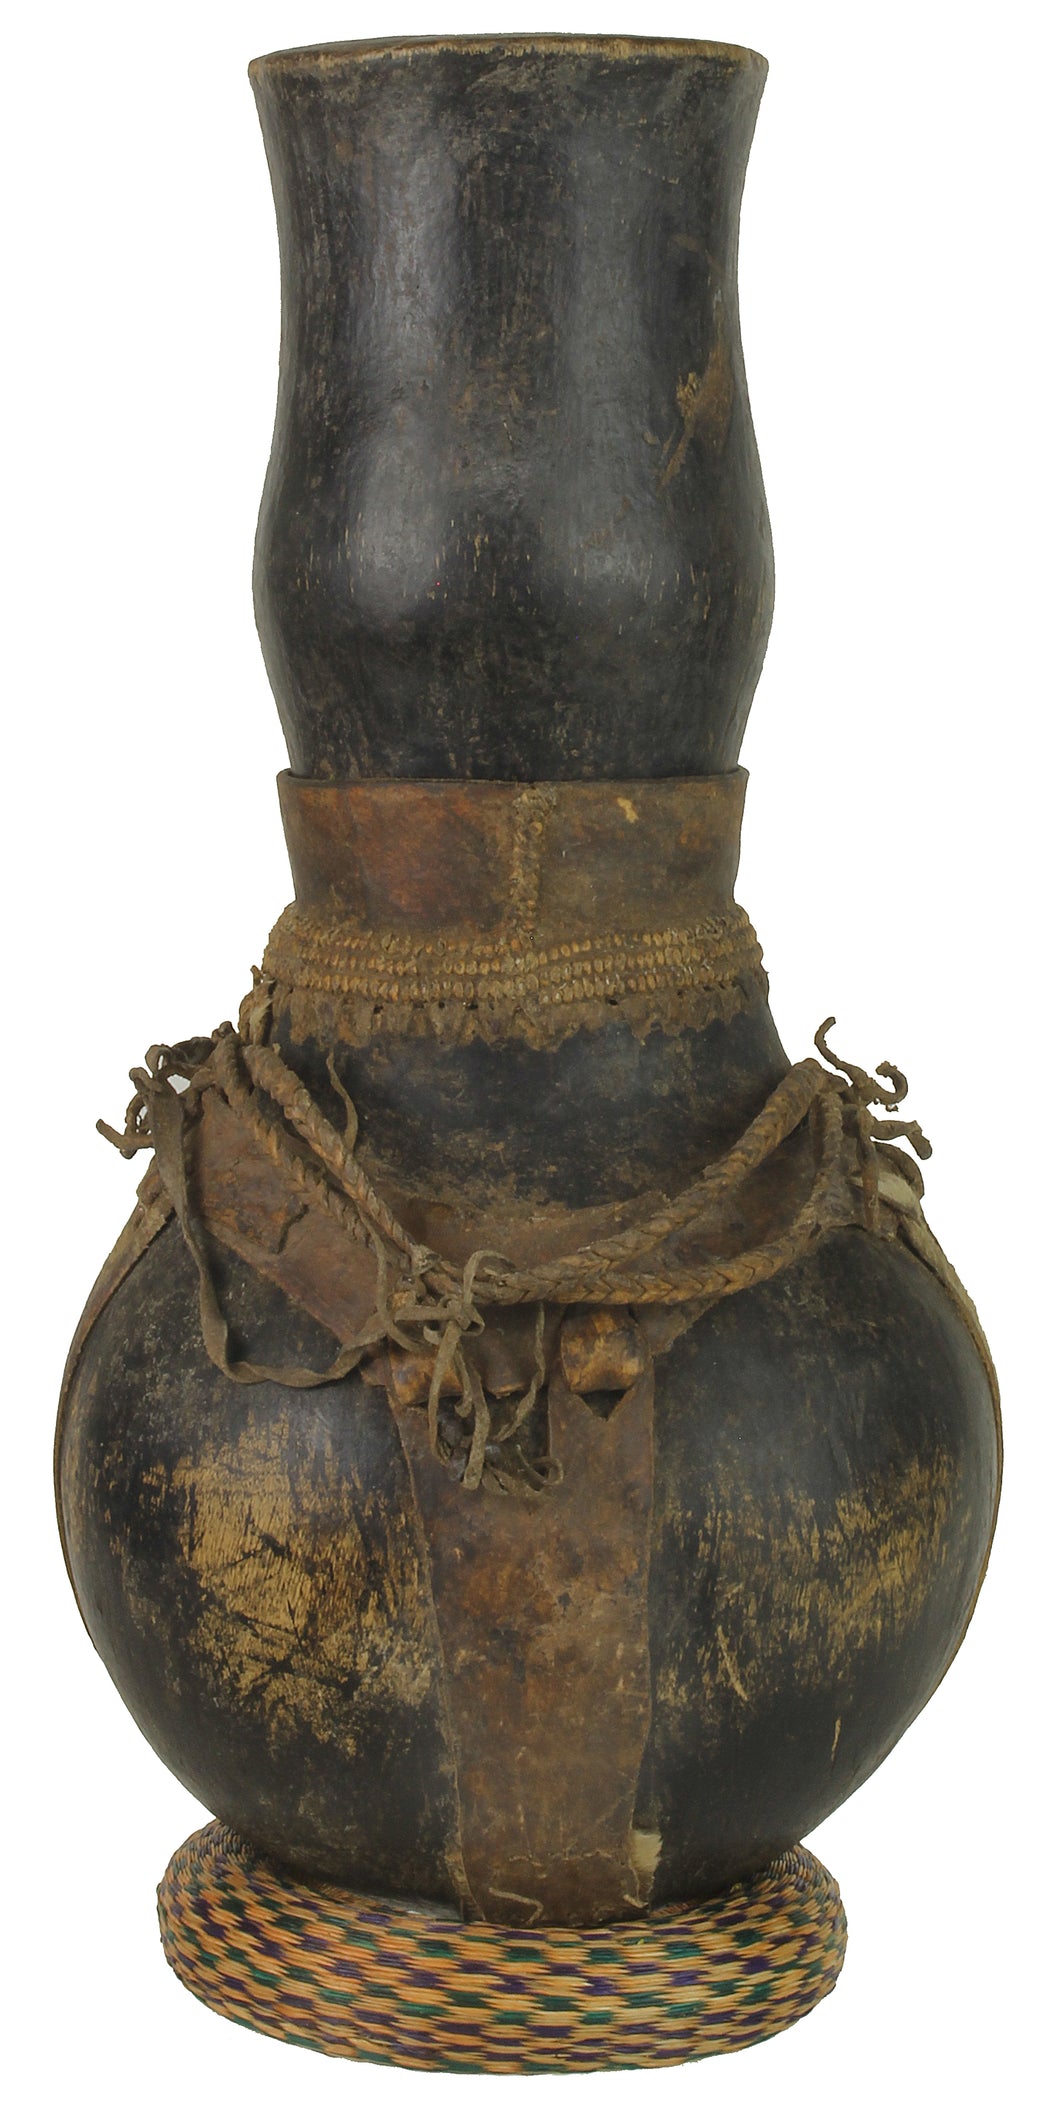 Vintage Wooden & Leather Milk Vessel from Congo, Africa | 15" - Niger Bend